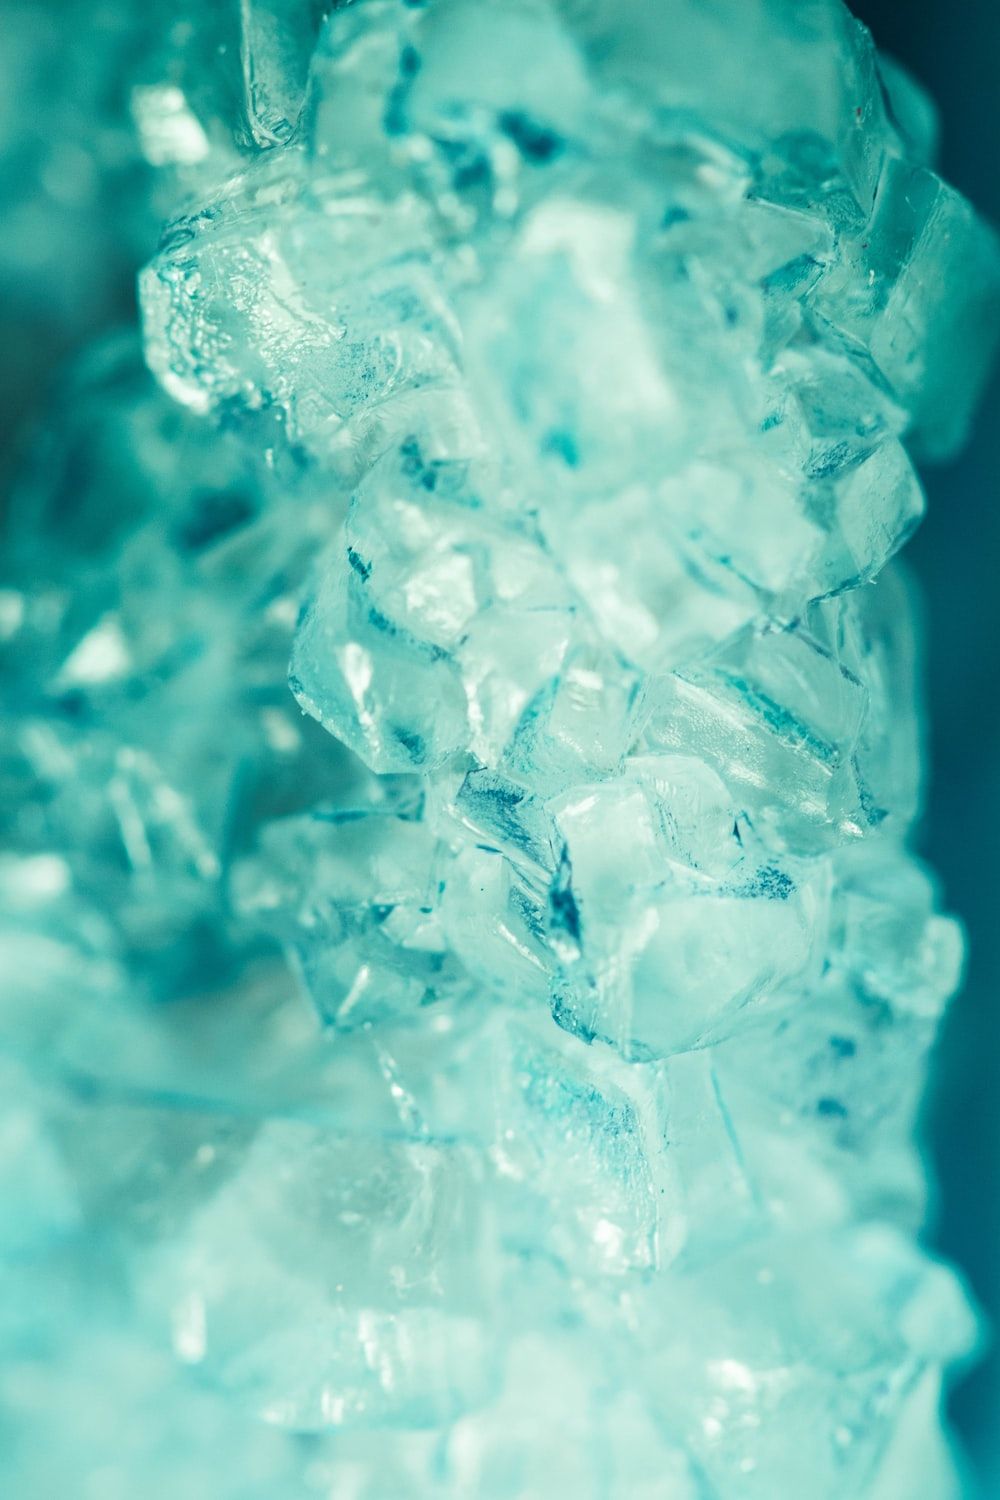 A close up of some ice in water - Teal, cyan, aqua, turquoise, ice